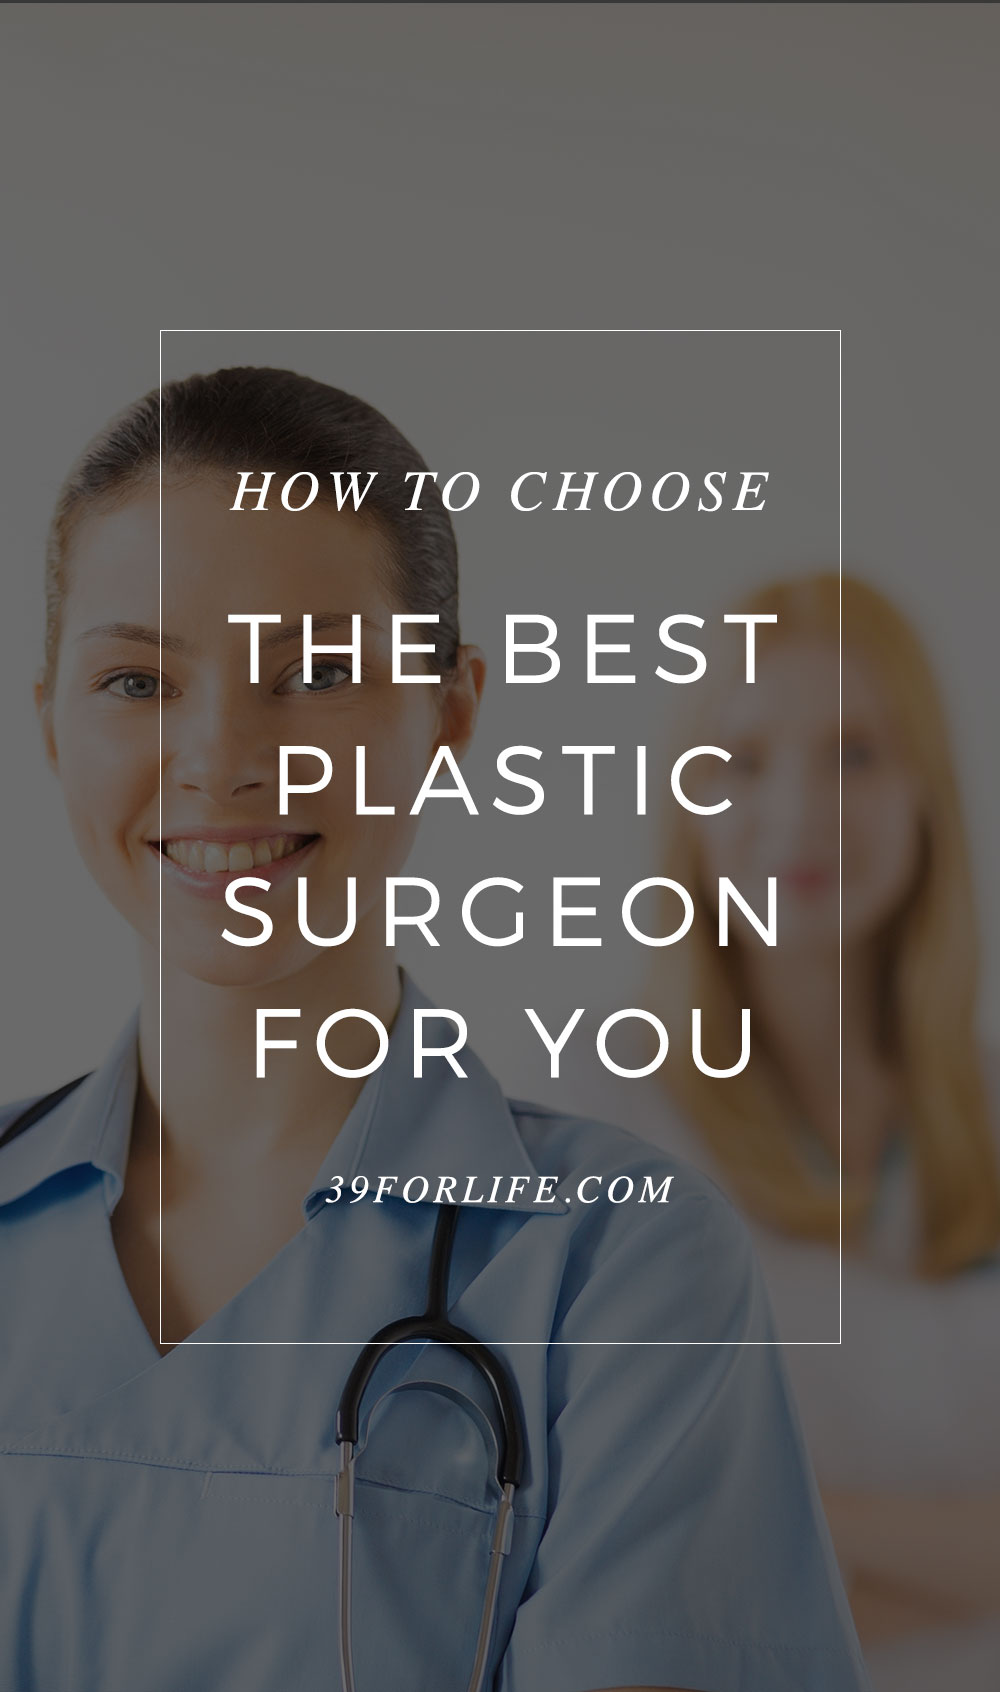 Don't put your body at risk with a sub-standard plastic surgeon. Know what questions to ask before getting any procedures done.